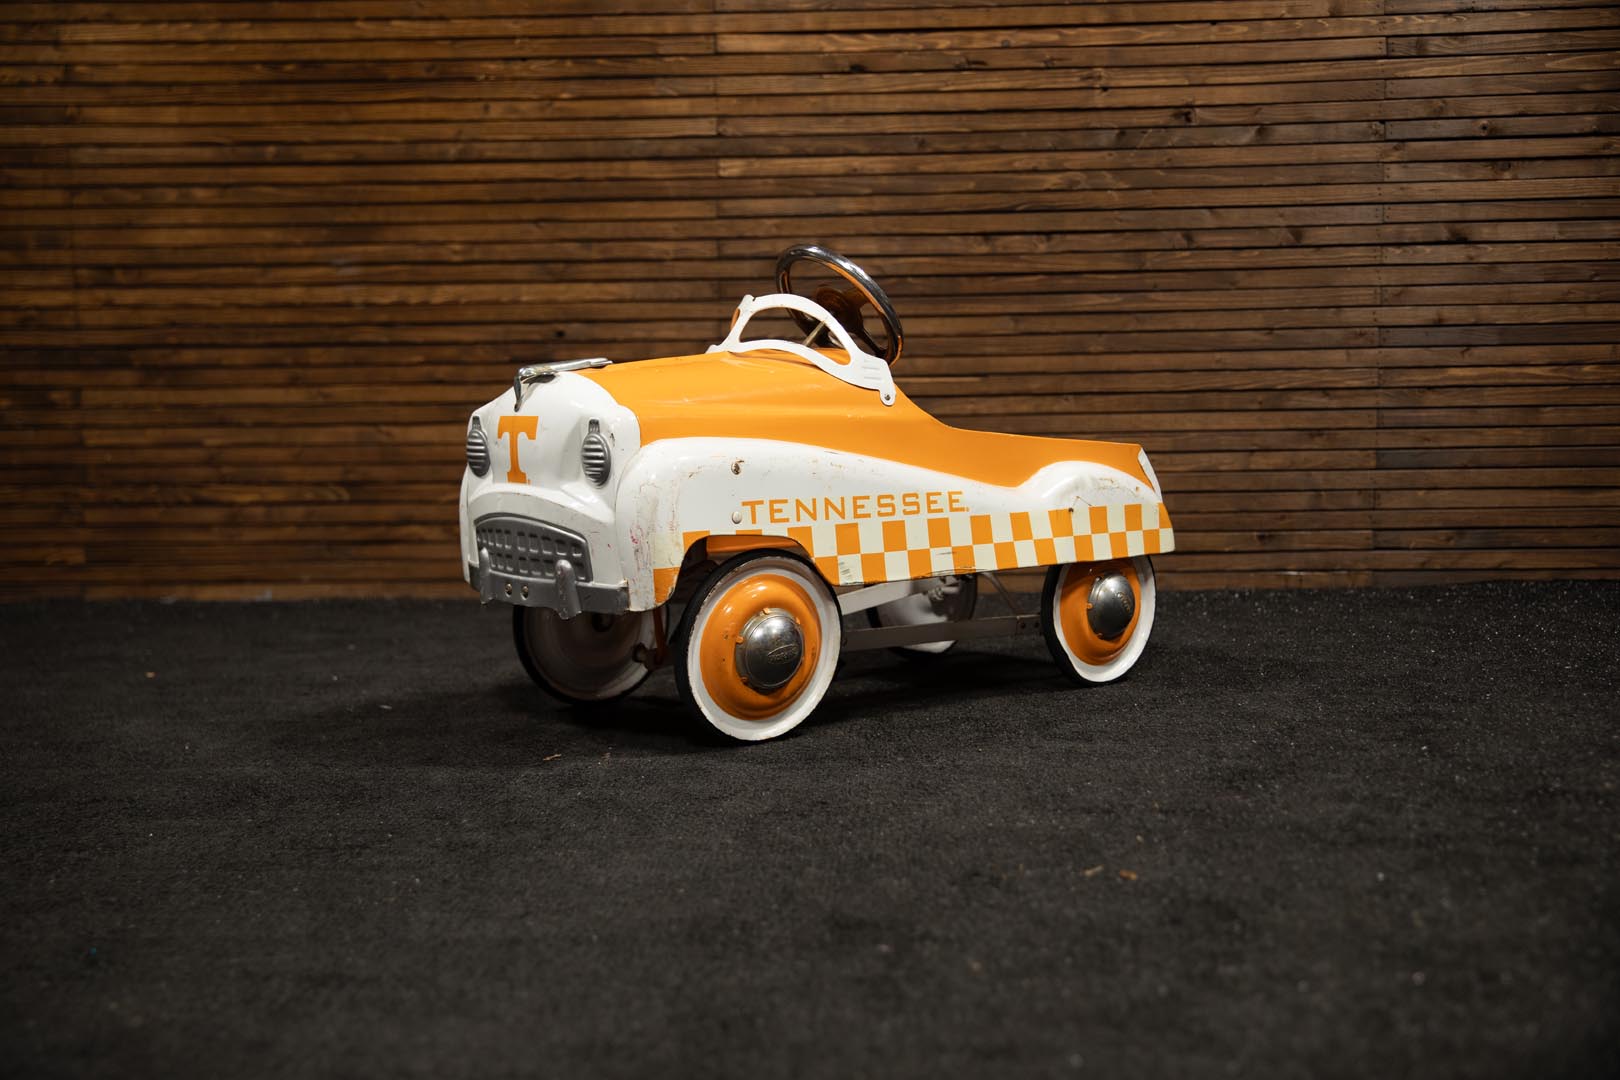  Tennessee Volunteers Murray St yle Pedal Car by Gearbox 